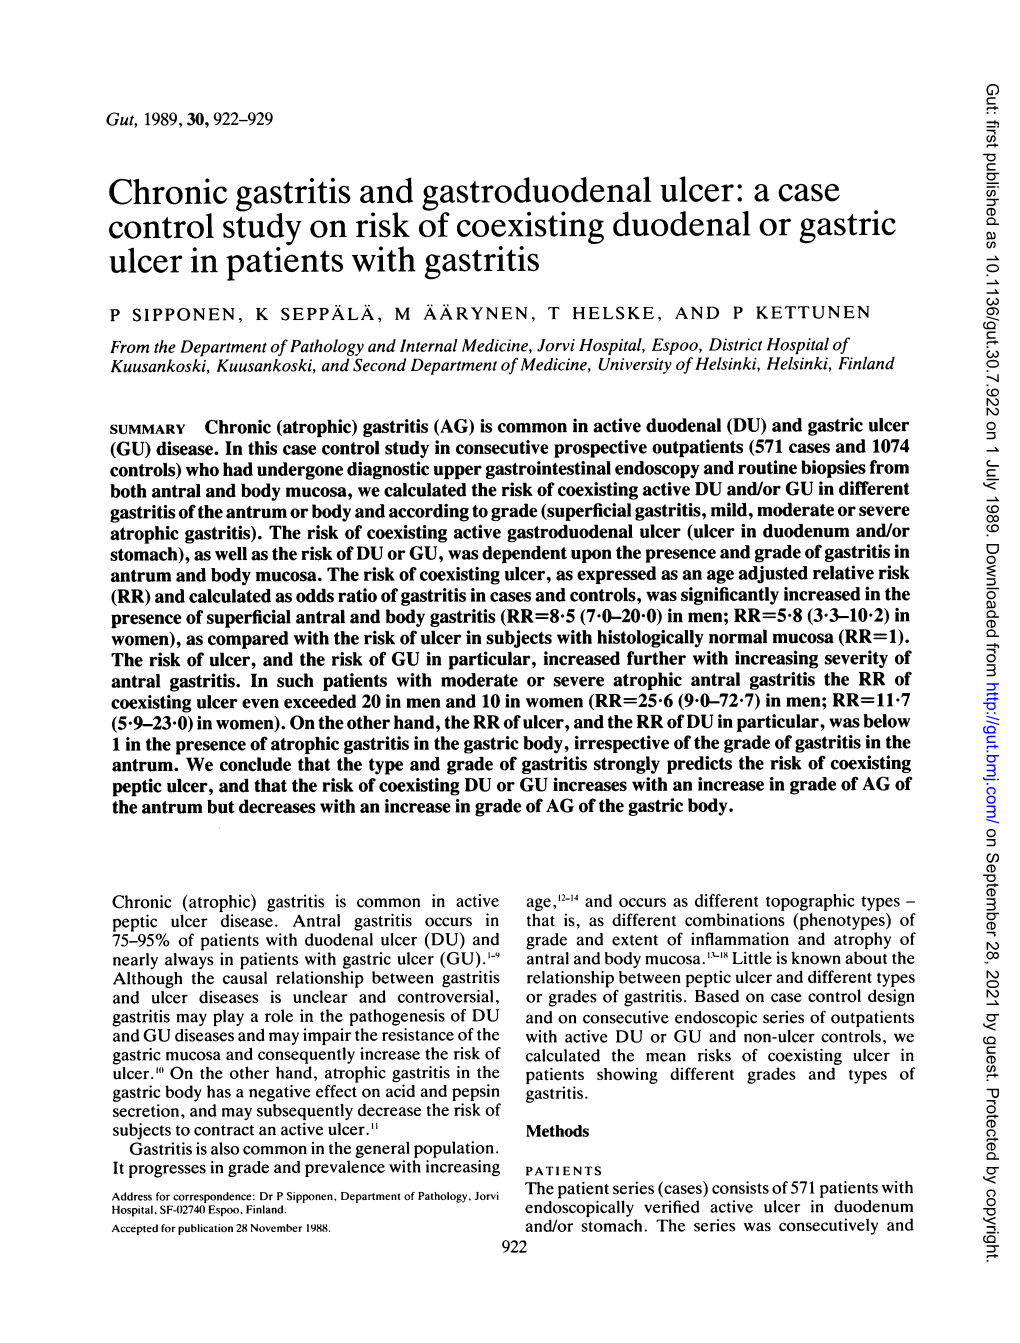 Chronic Gastritis and Gastroduodenal Ulcer: a Case Control Study on Risk of Coexisting Duodenal Or Gastric Ulcer in Patients with Gastritis